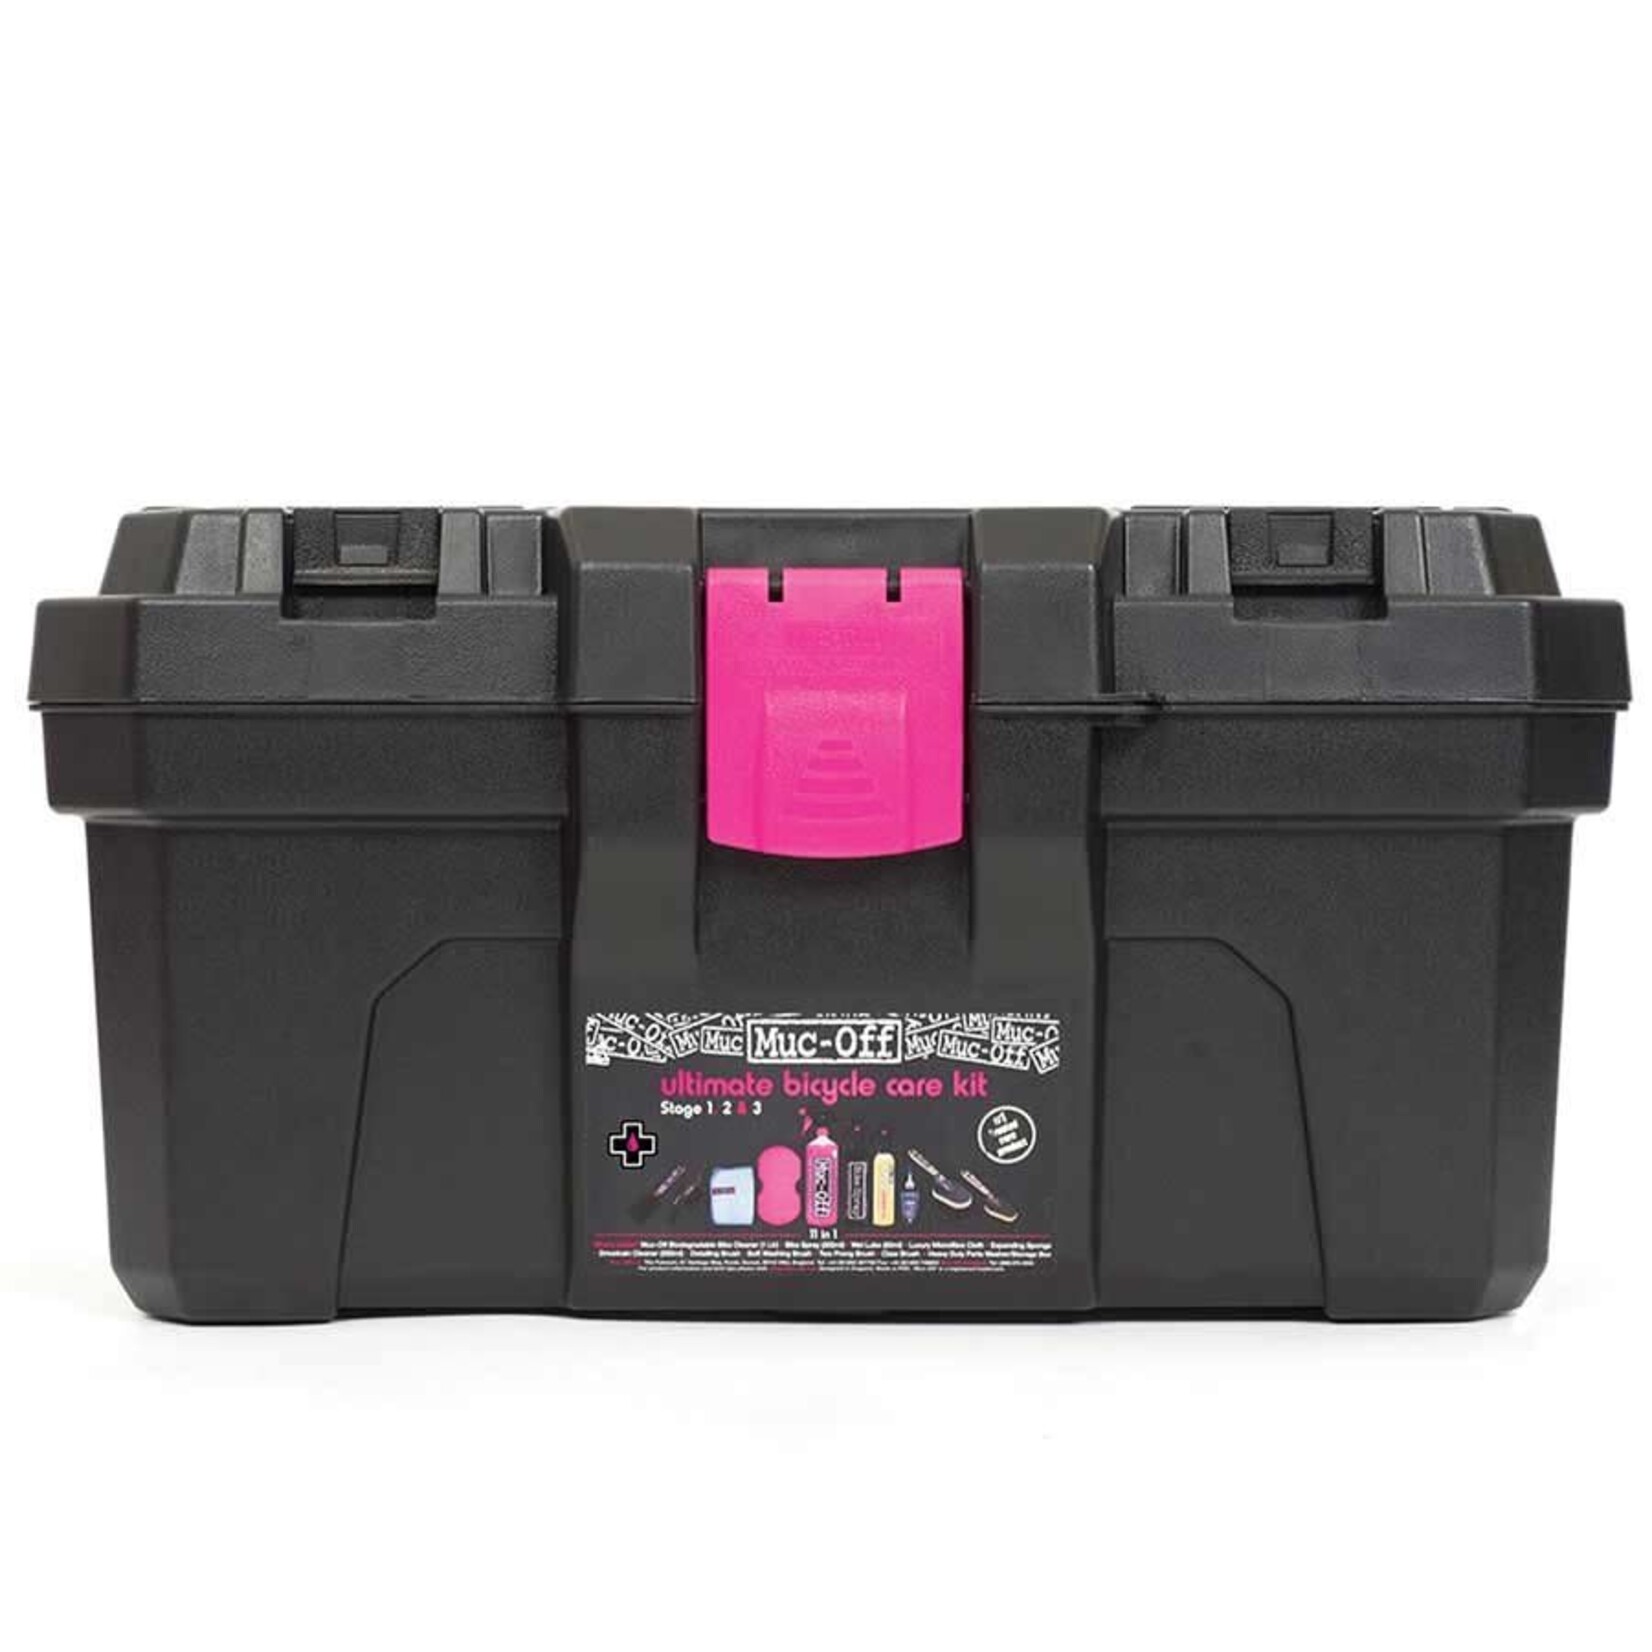 Muc-Off Muc-Off, Ultimate Bicycle Cleaning Kit